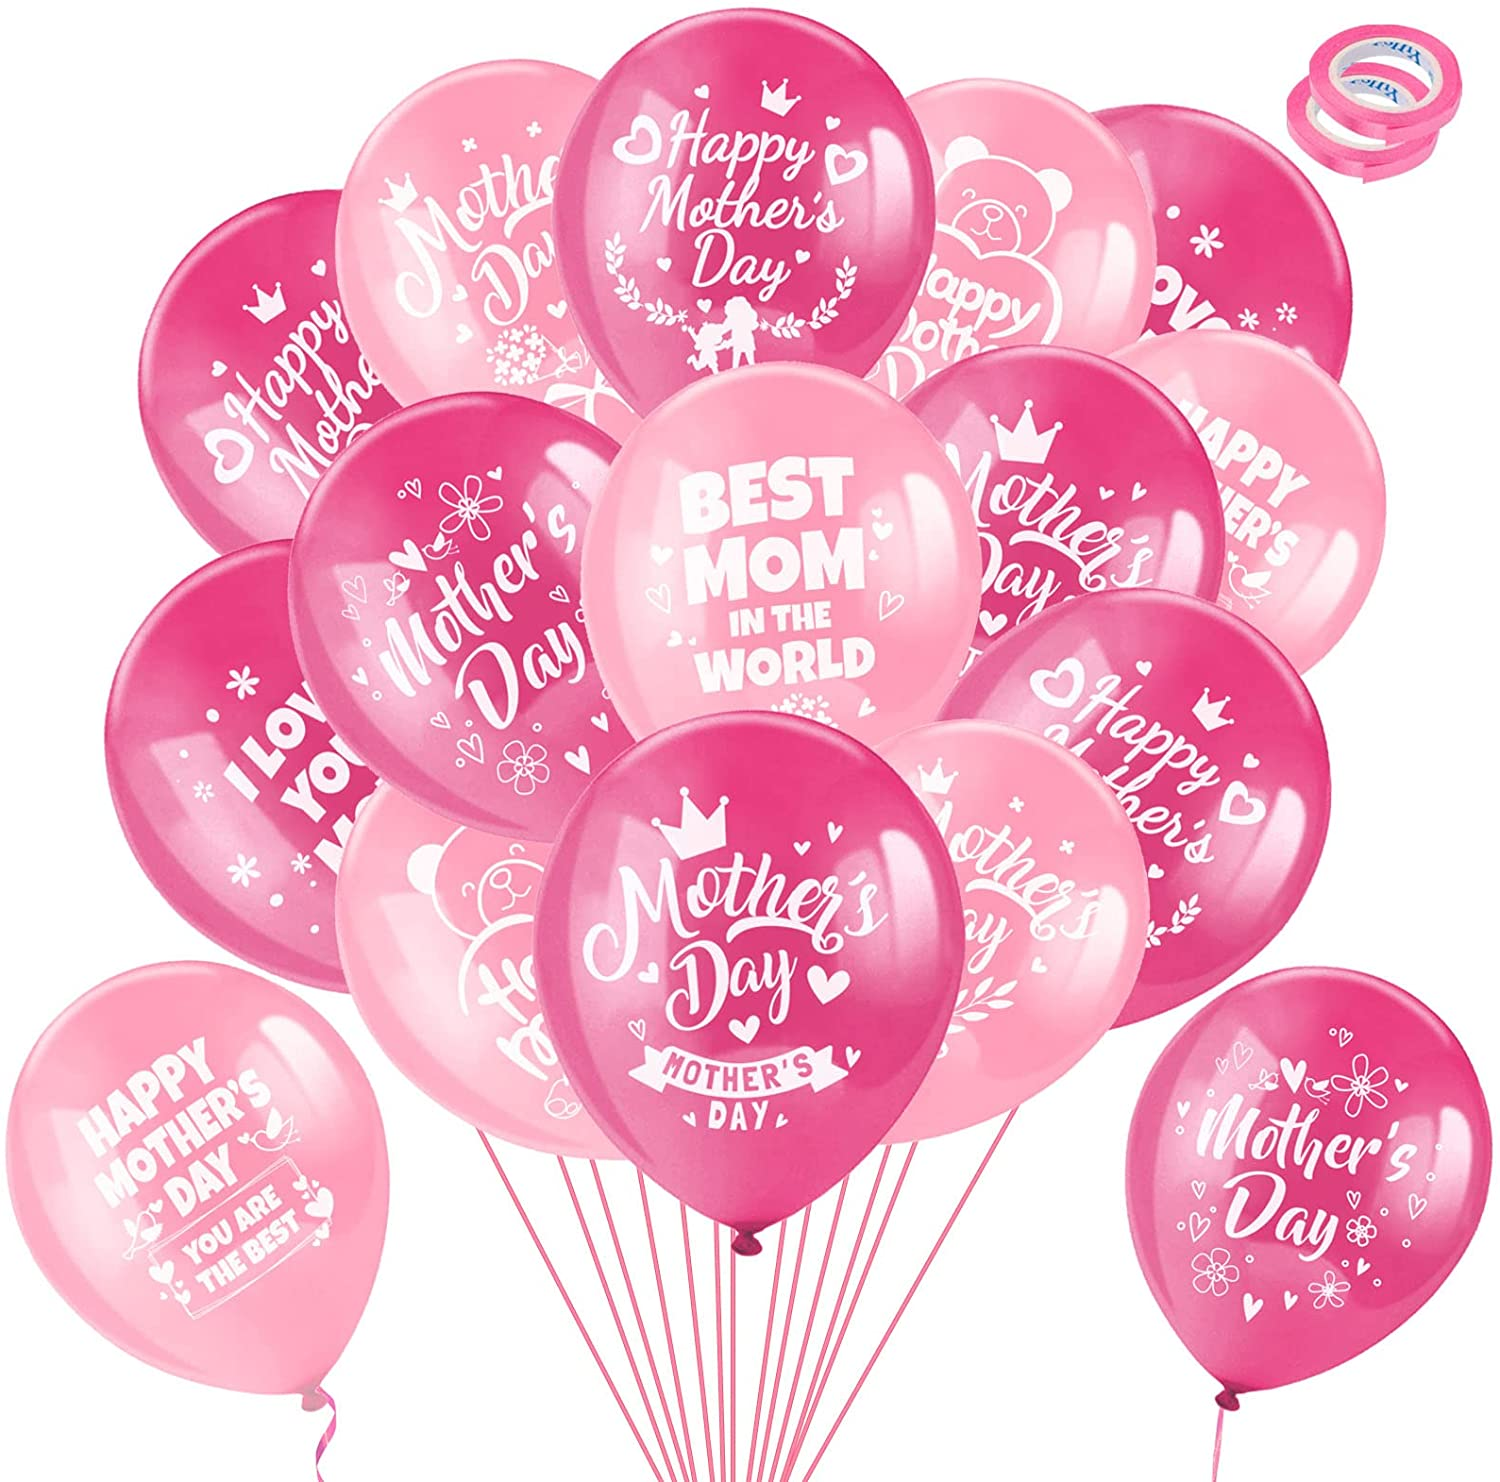 Happy Mother'S Day Decorations, 32Pcs Happy Mother'S Day Balloons Set, Pink Mothers Day Latex Balloons Support Helium or Air, I Love You Mom, Best Mom in the World, You Are the Best